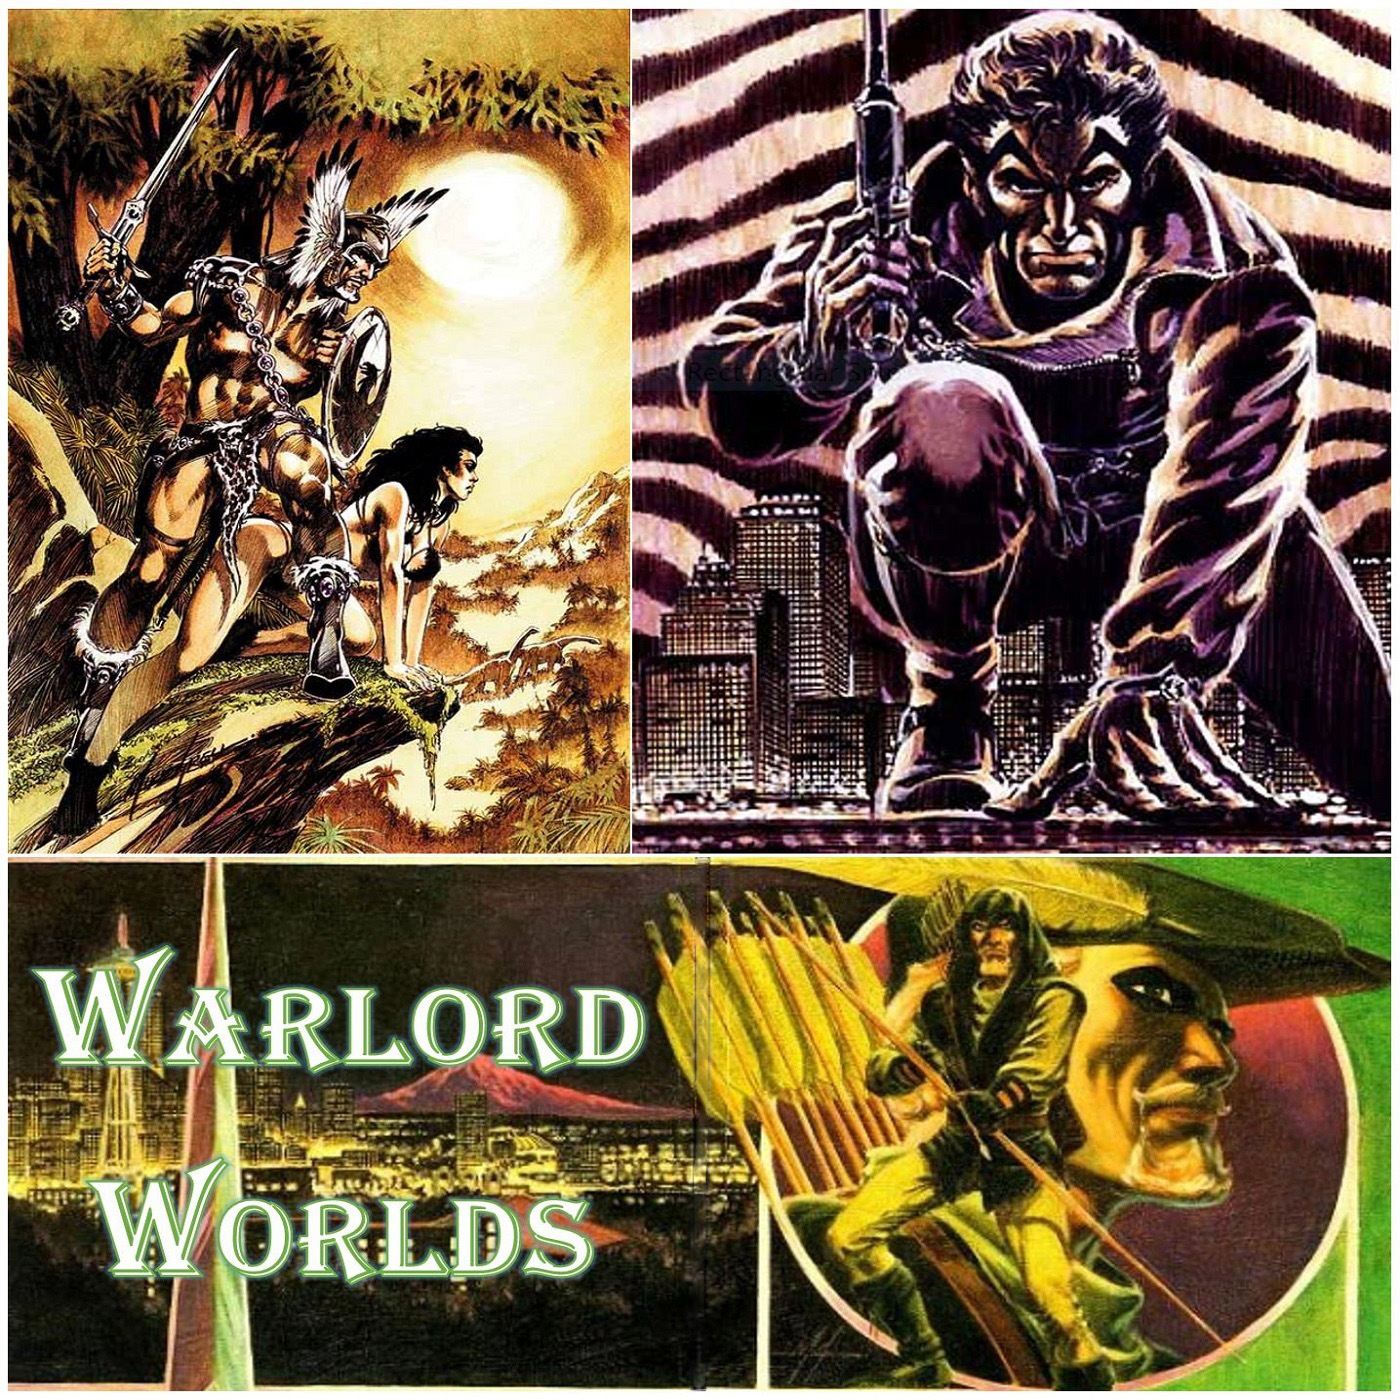 Warlord Worlds Episode 18